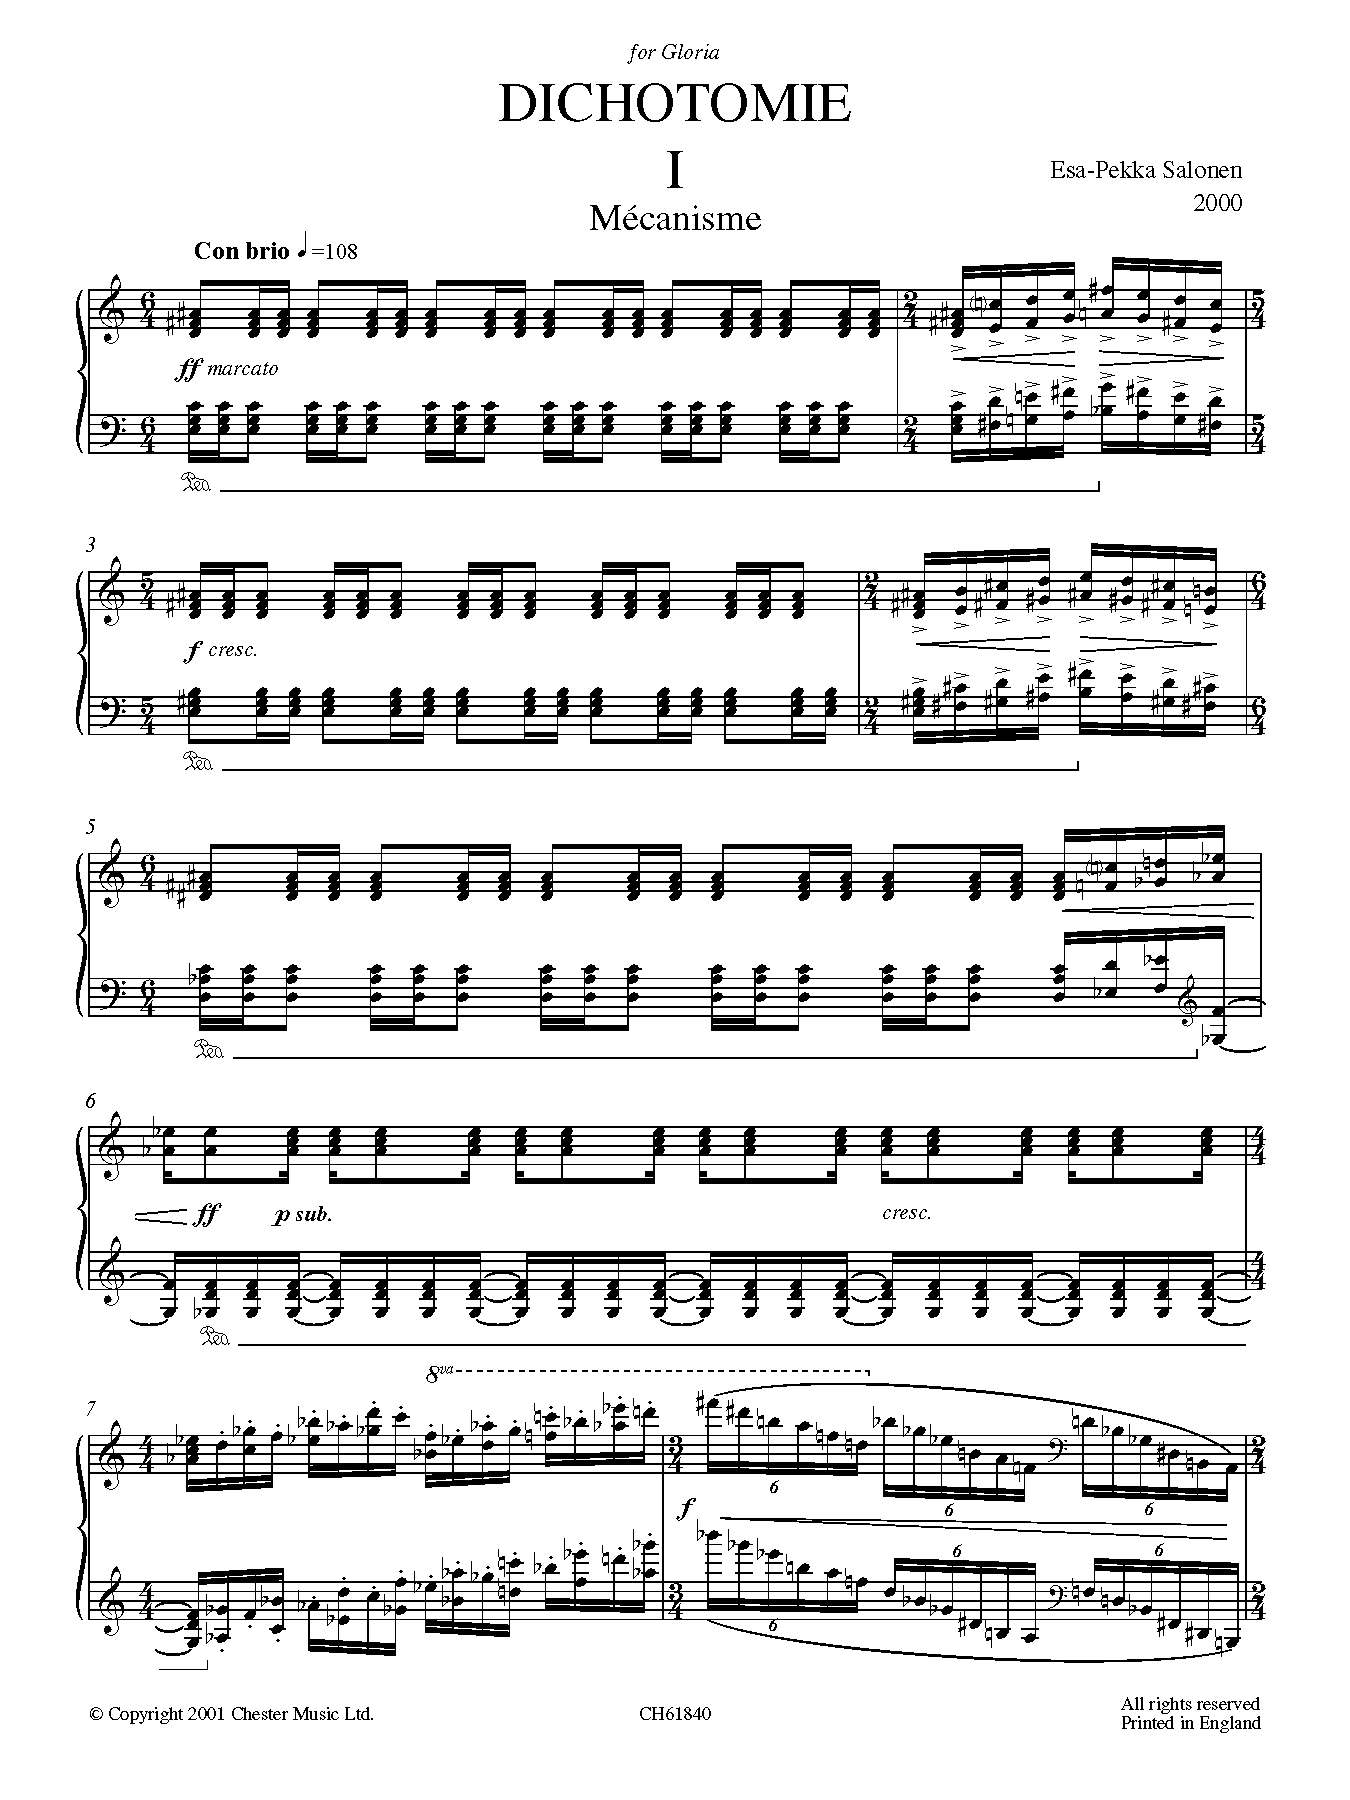 Esa-Pekka Salonen Dichotomie I - Méchanisme sheet music preview music notes and score for Piano including 22 page(s)